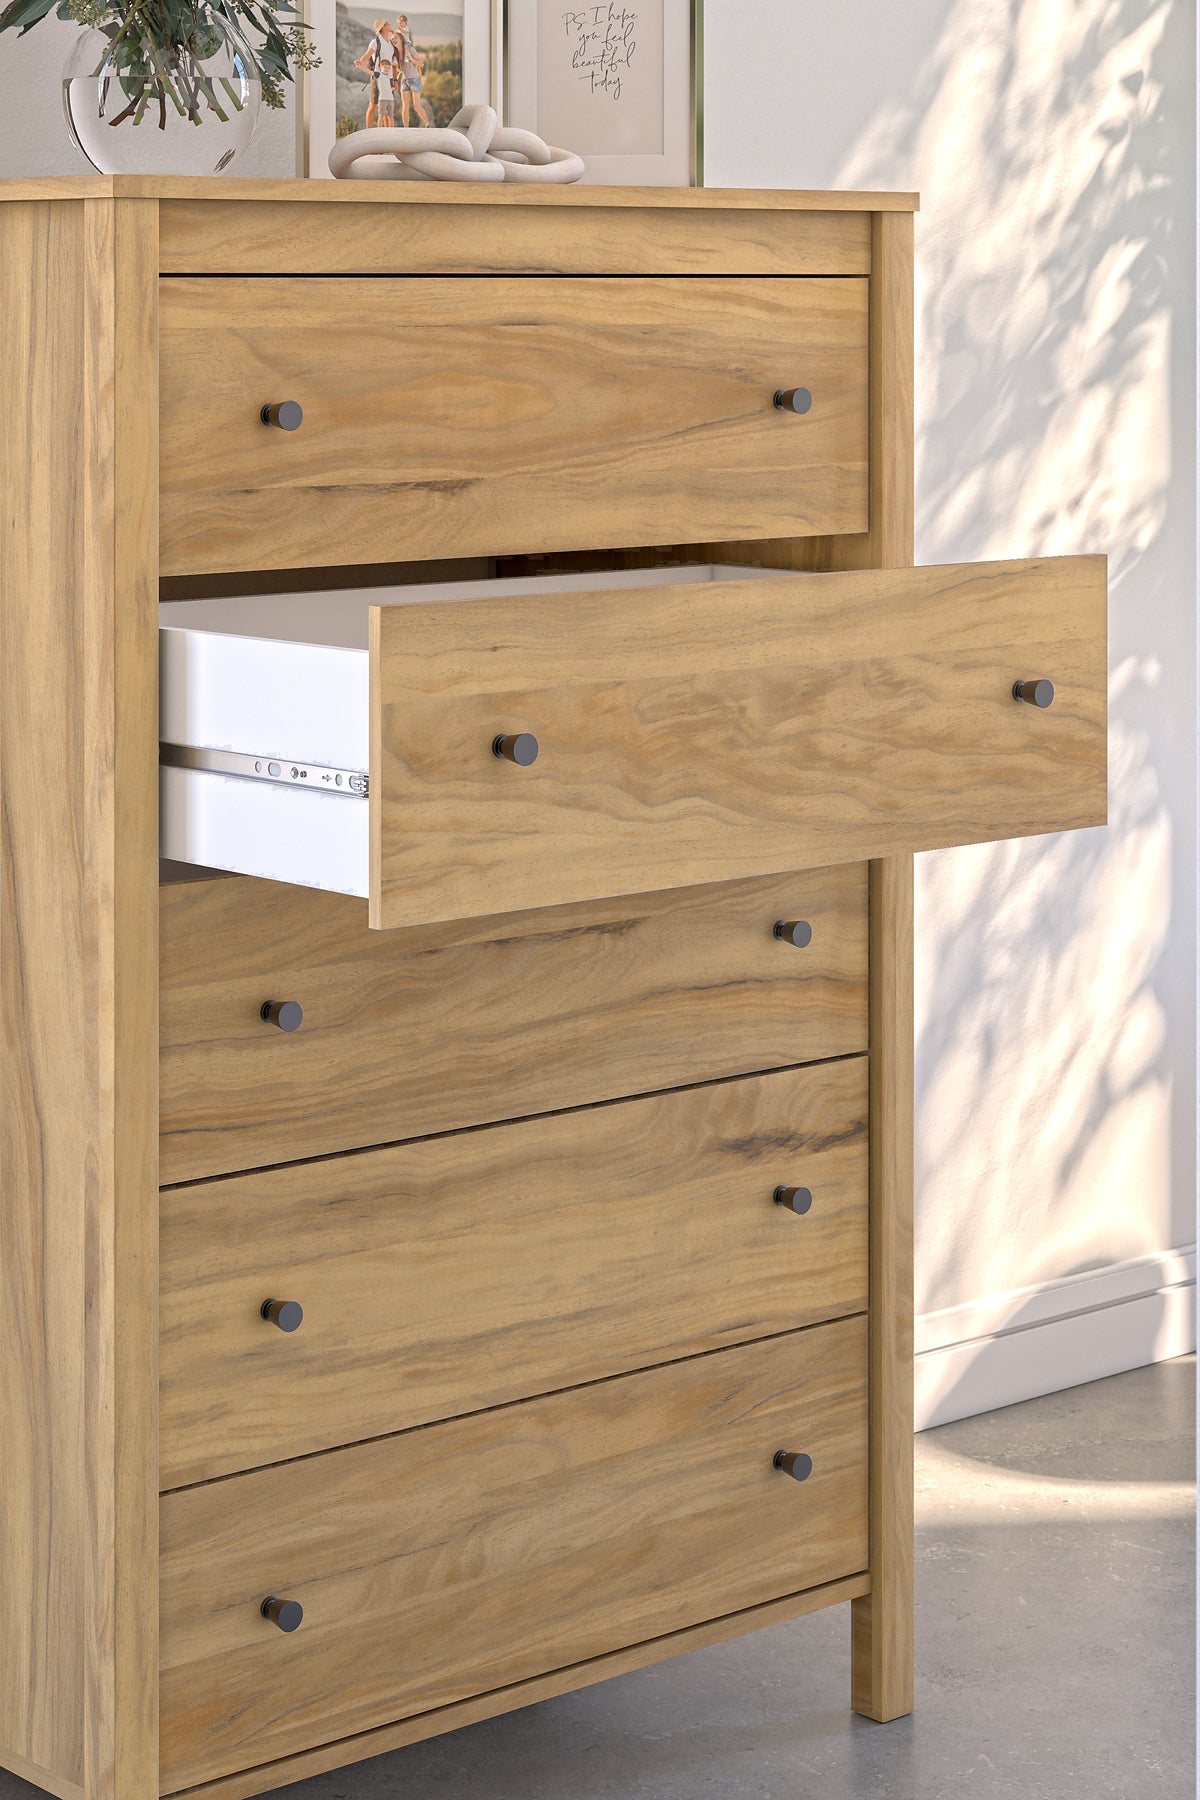 Ashley Express - Bermacy Five Drawer Chest